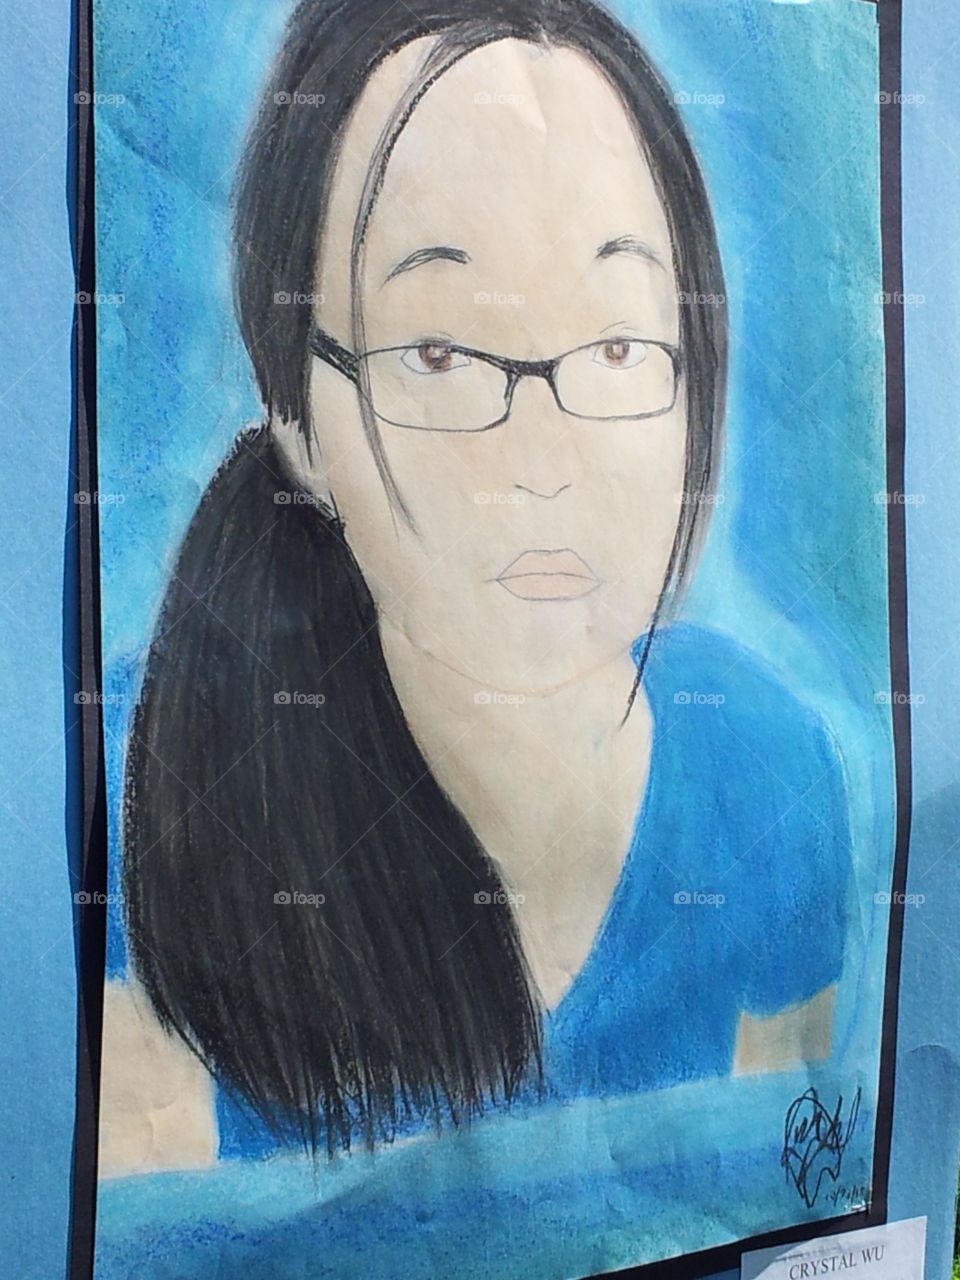 The Crystal Wu self portrait at the Wappingers Central School District art expo back in May 2014 